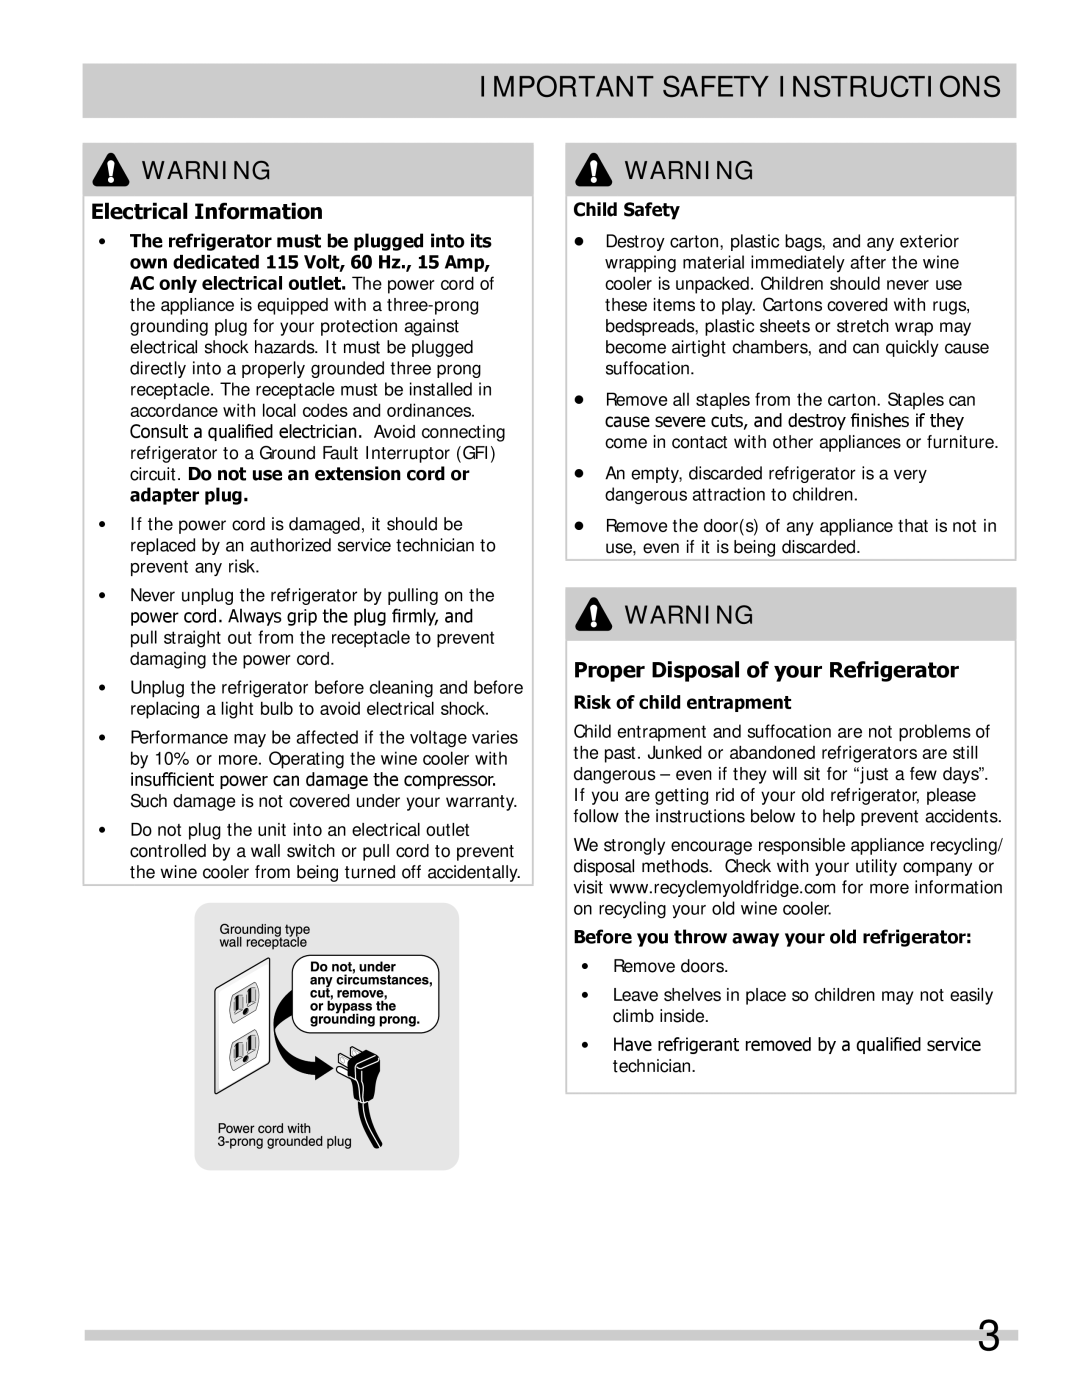 Frigidaire FFPT10F3MW Important Safety Instructions, Electrical Information, Proper Disposal of your Refrigerator 